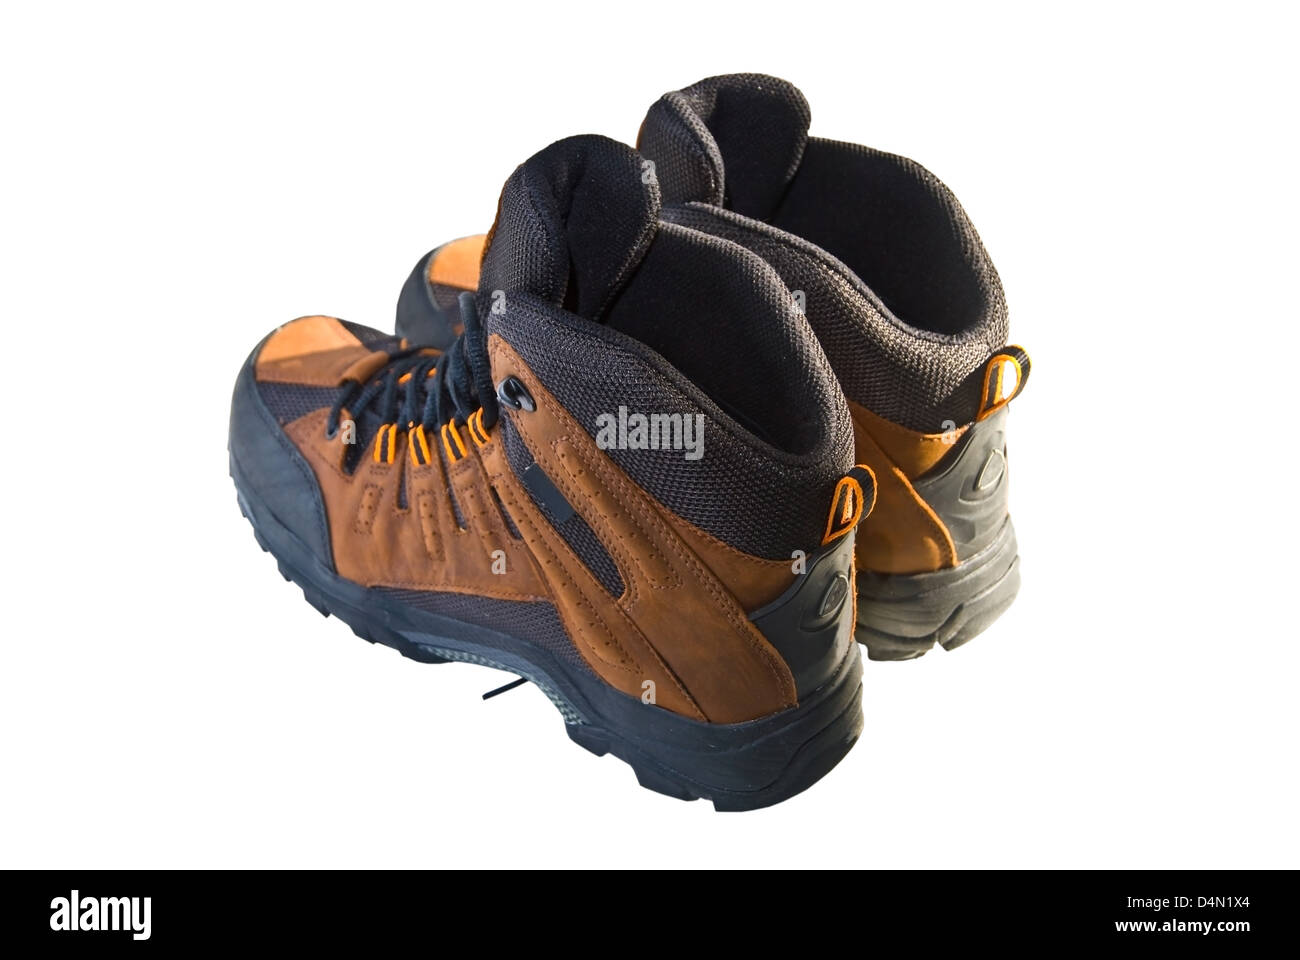 Hiking boots in the sunlight on a white background. Stock Photo